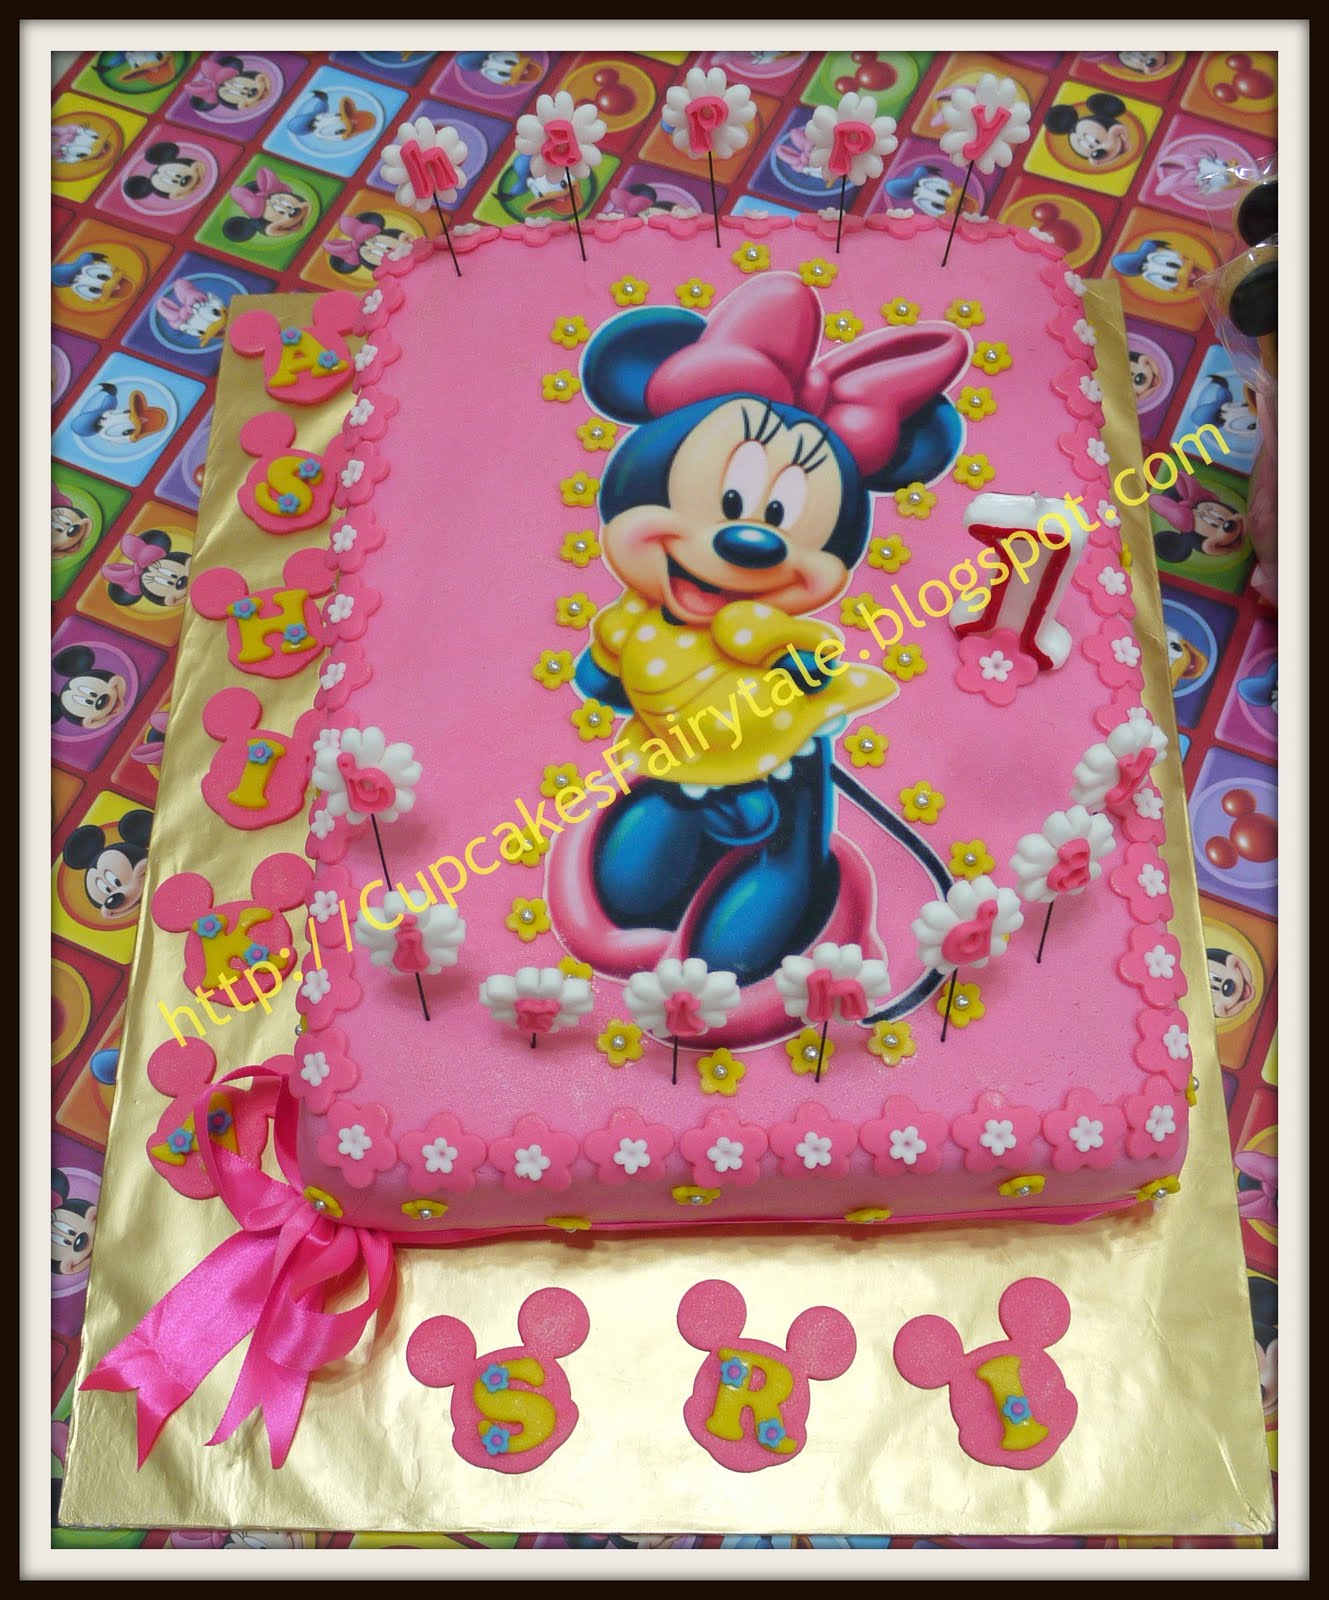 2 year old baby girl birthday cakes